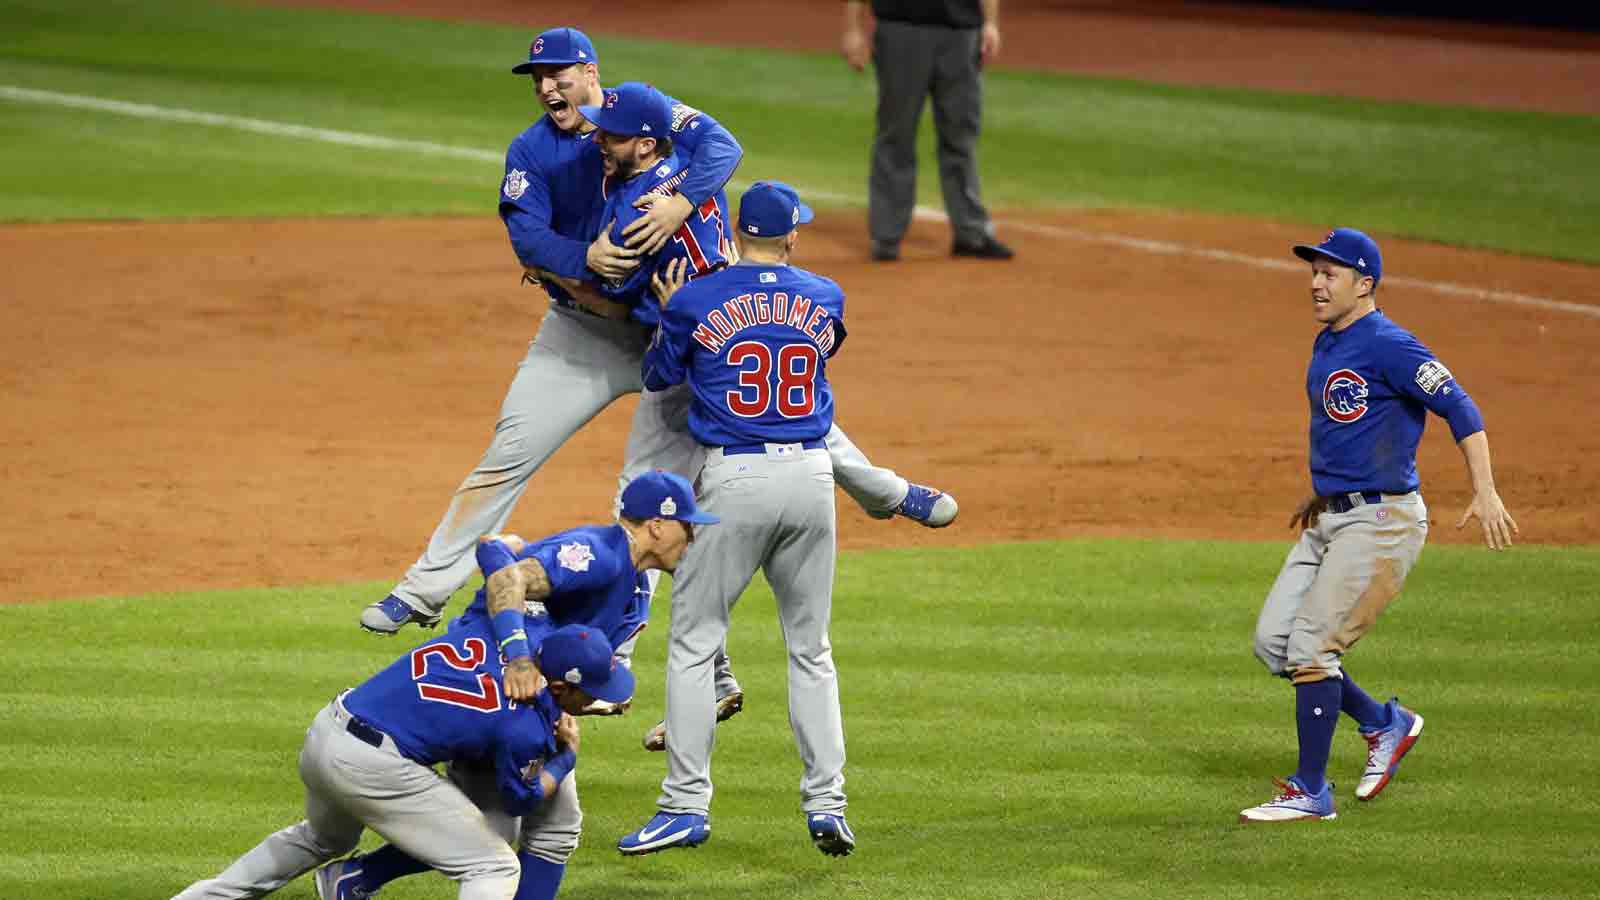 11/2/16: Cubs win World Series with 10th-inning rally 